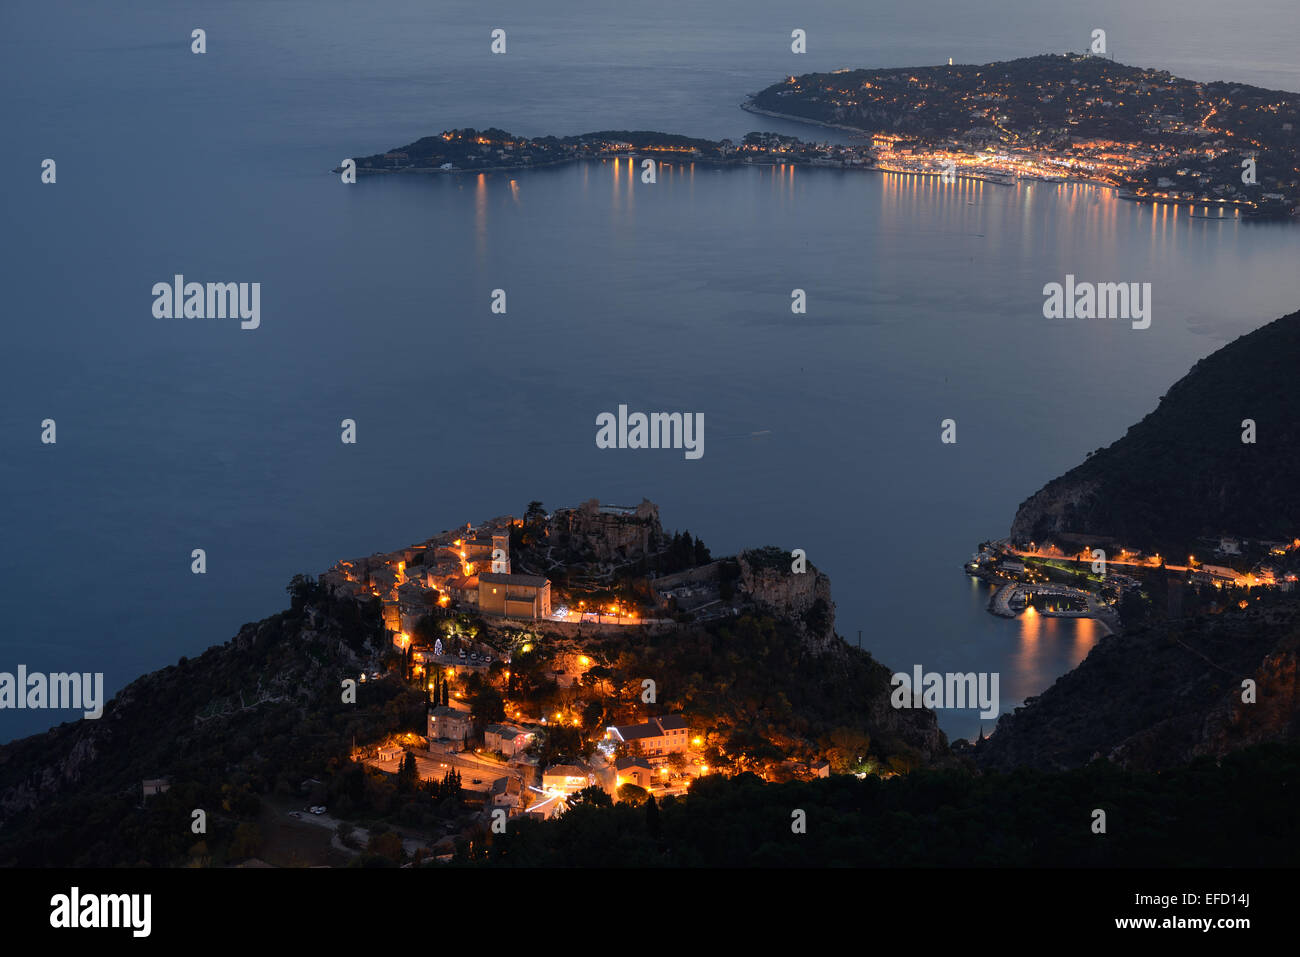 Hilltop village of Èze (427m asl) overlooking the Mediterranean and Saint-Jean-Cap-Ferrat in the distance. Alpes-Maritimes, French Riviera, France. Stock Photo